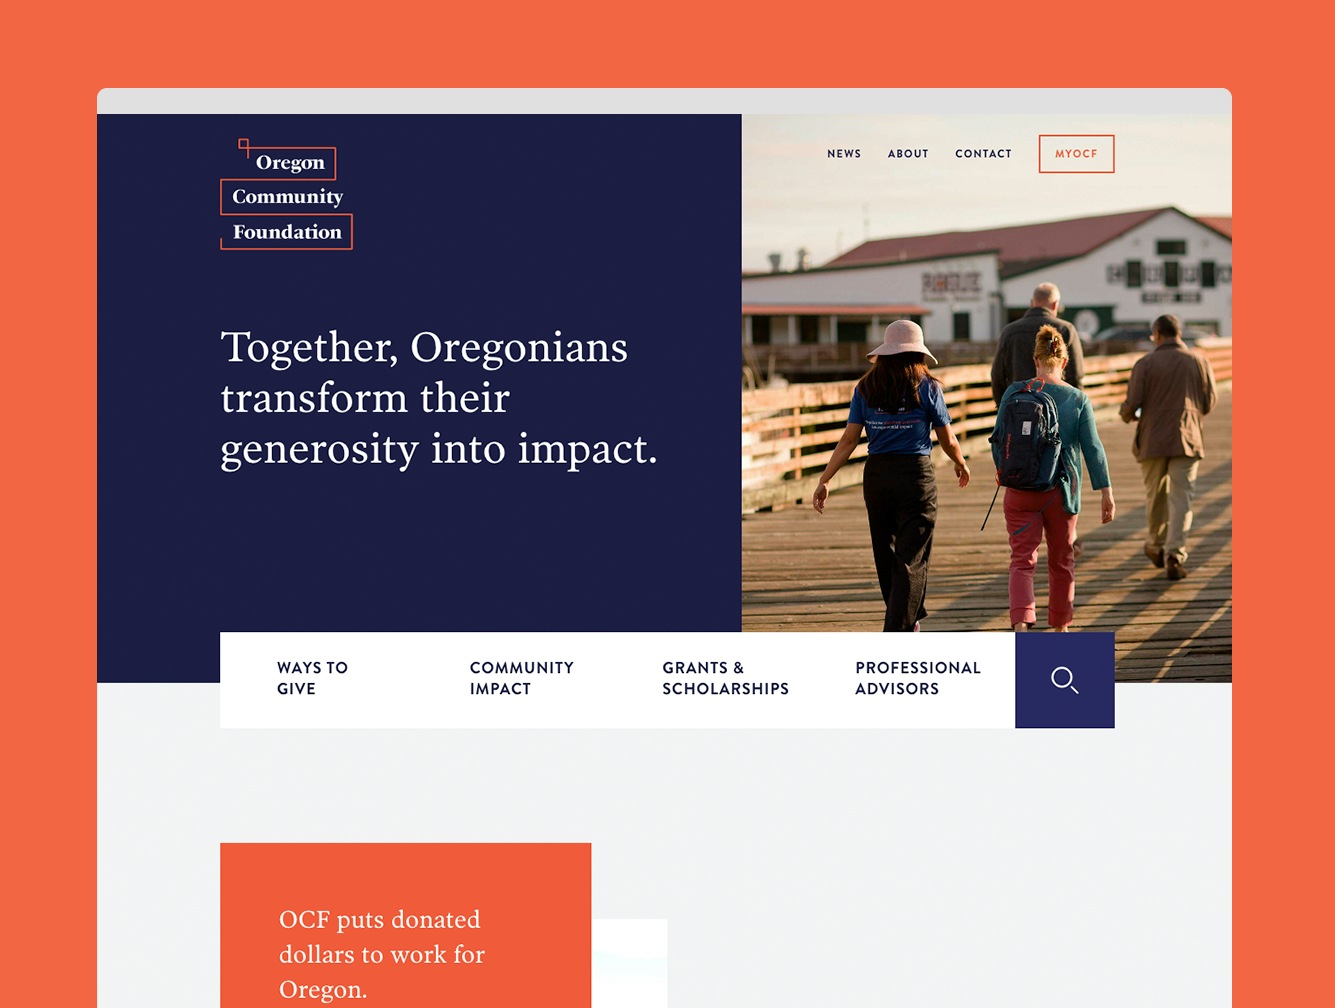 An image of the homepage for Oregon Community Foundation